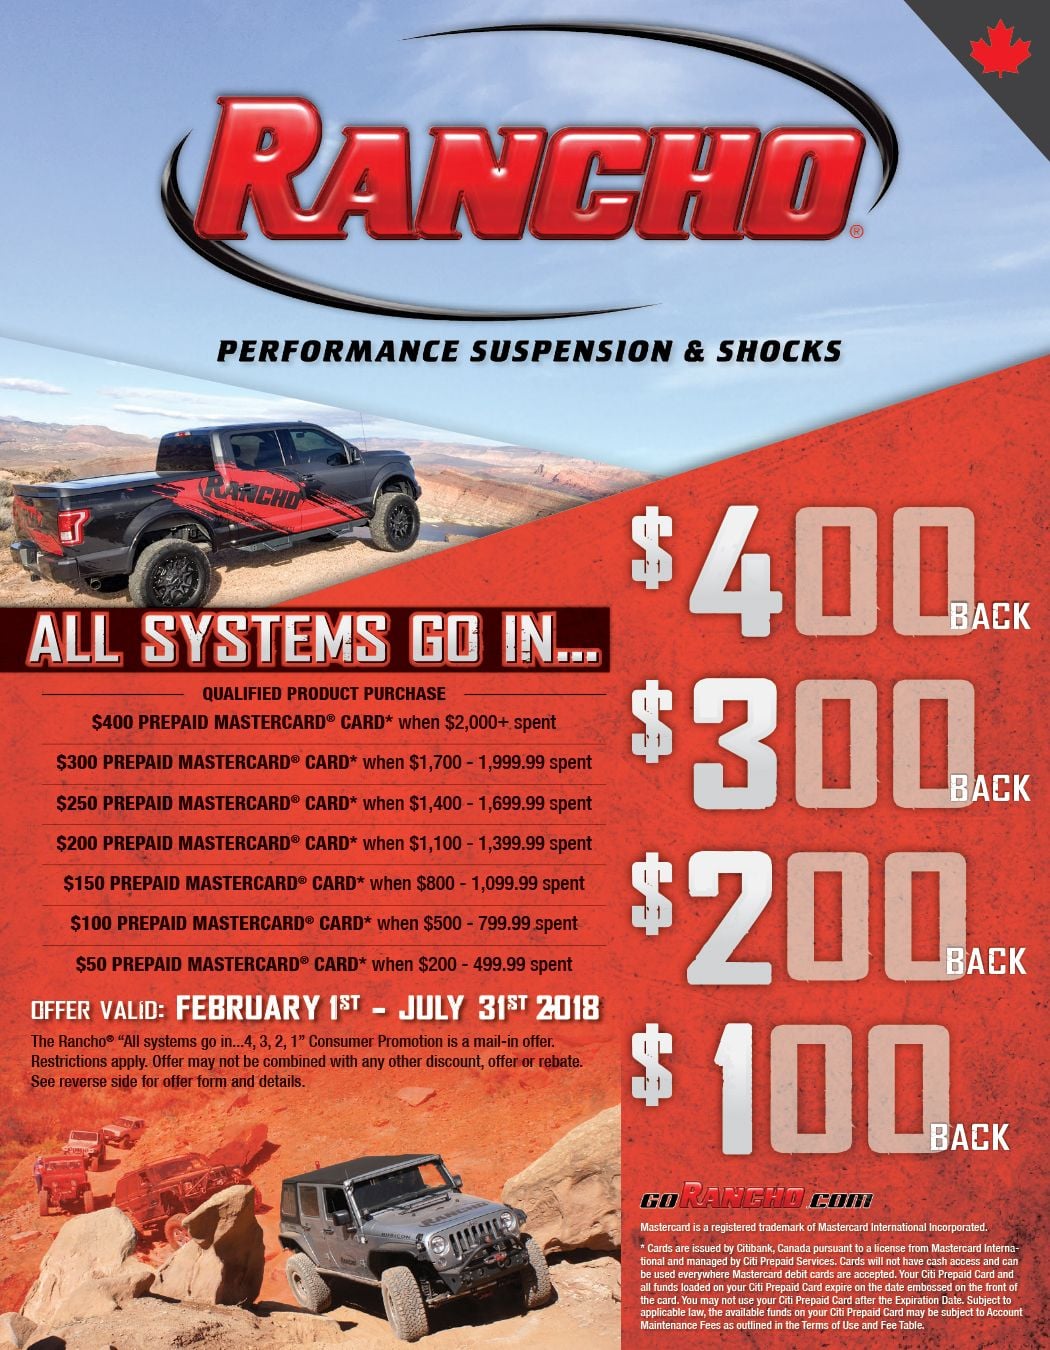 Steering/Suspension - Our Spring rebate is here!!! - New - 2007 to 2018 Jeep Wrangler - Long Beach, CA 90712, United States